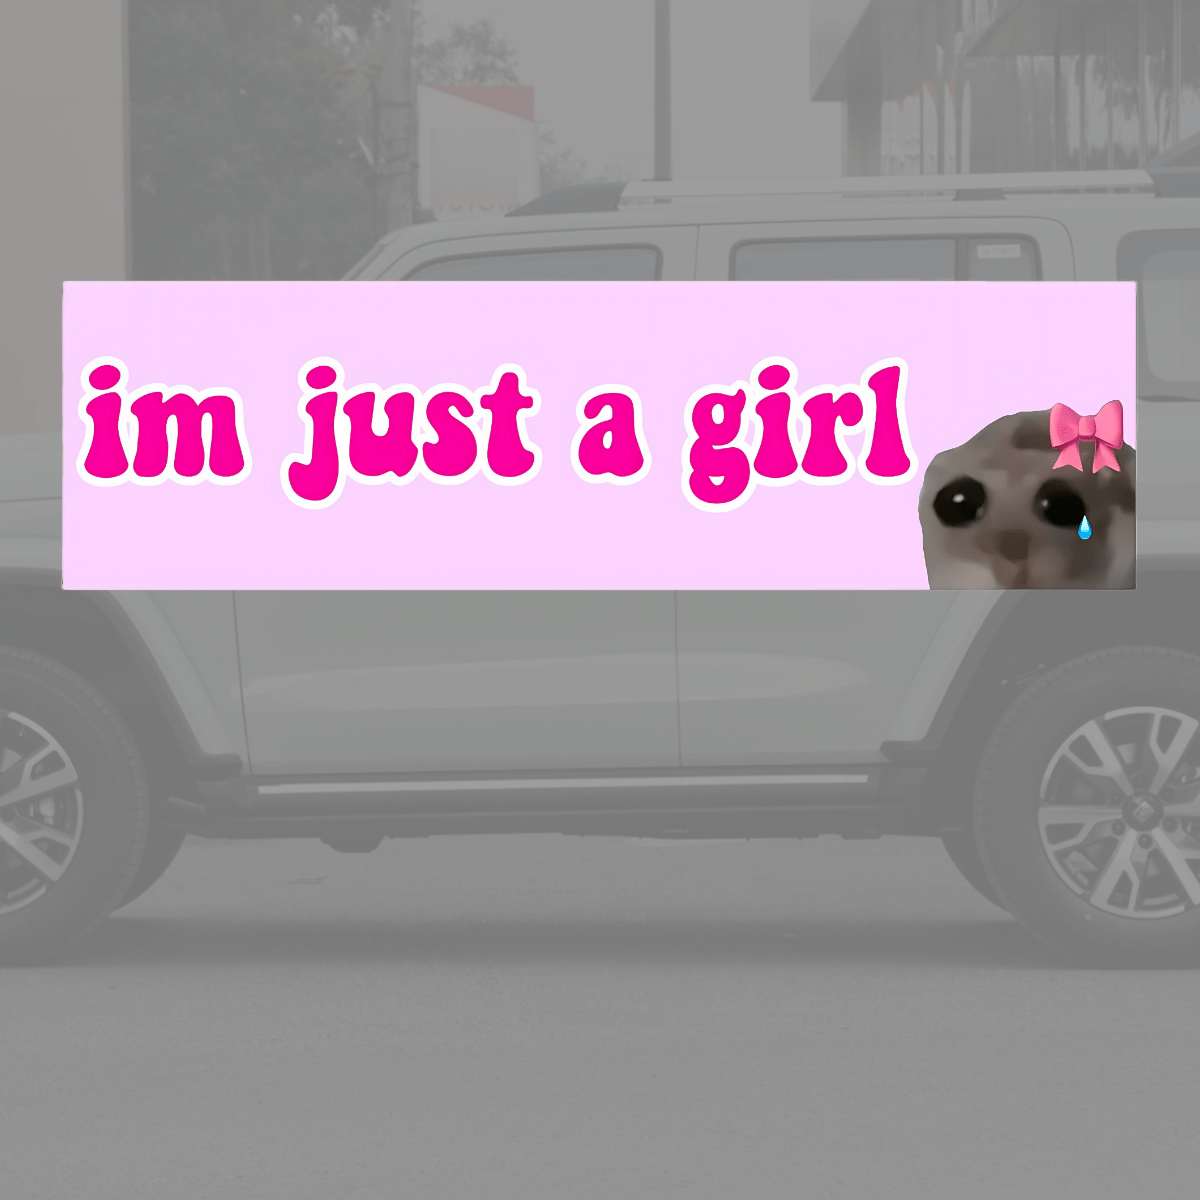 

Just A Girl" Funny Meme Bumper Sticker - Durable Weatherproof Vinyl Decal For Cars & Laptops, Perfect For Adding Personality To Your Vehicle Or Gear